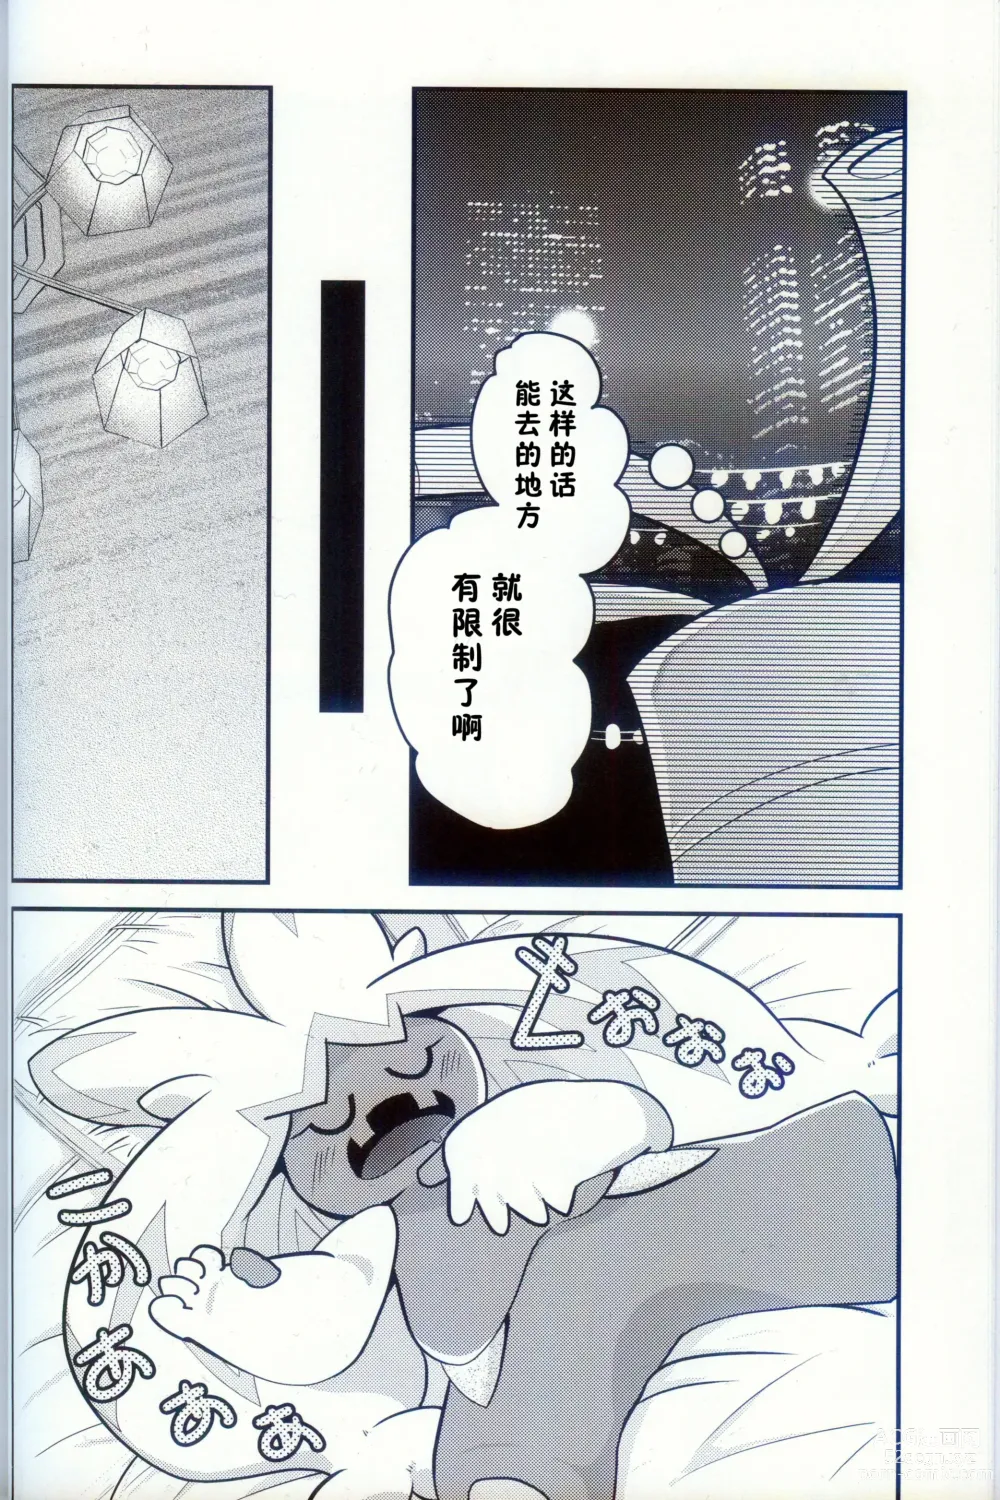 Page 9 of doujinshi 横滨的塞富豪巨锻匠